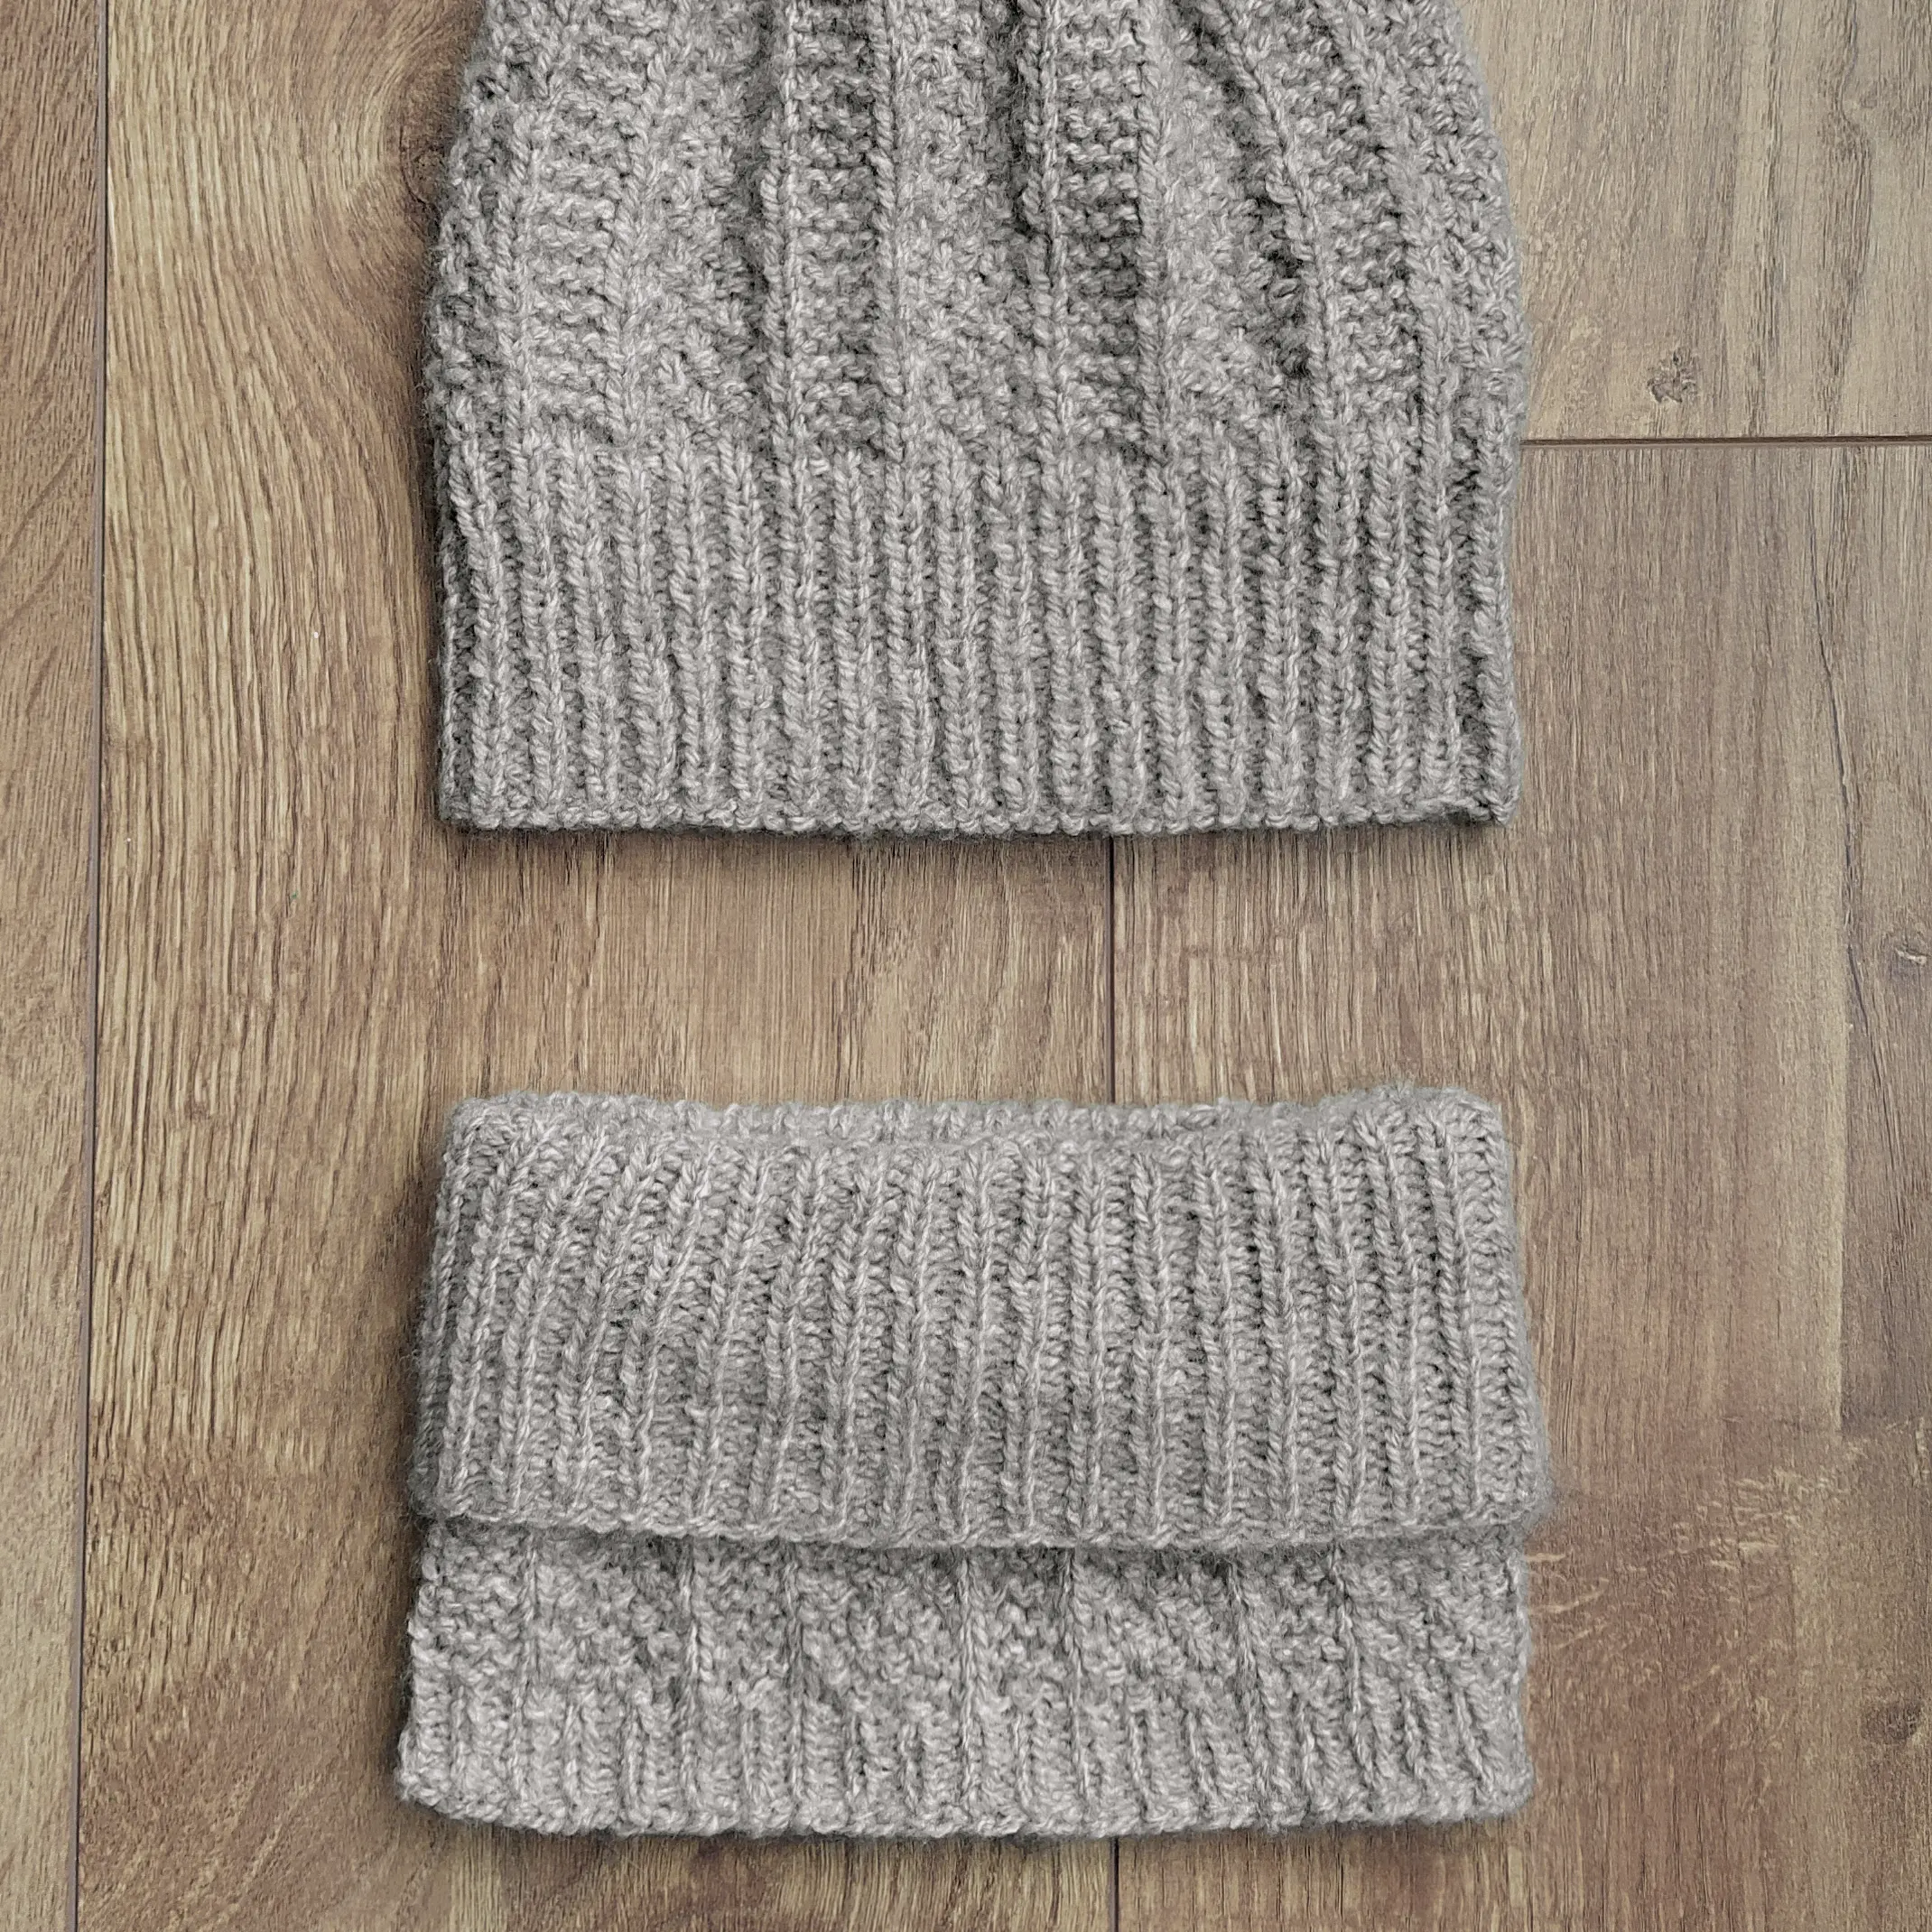 Flatlay of the cambronne cowl folded outward and the matching beanie